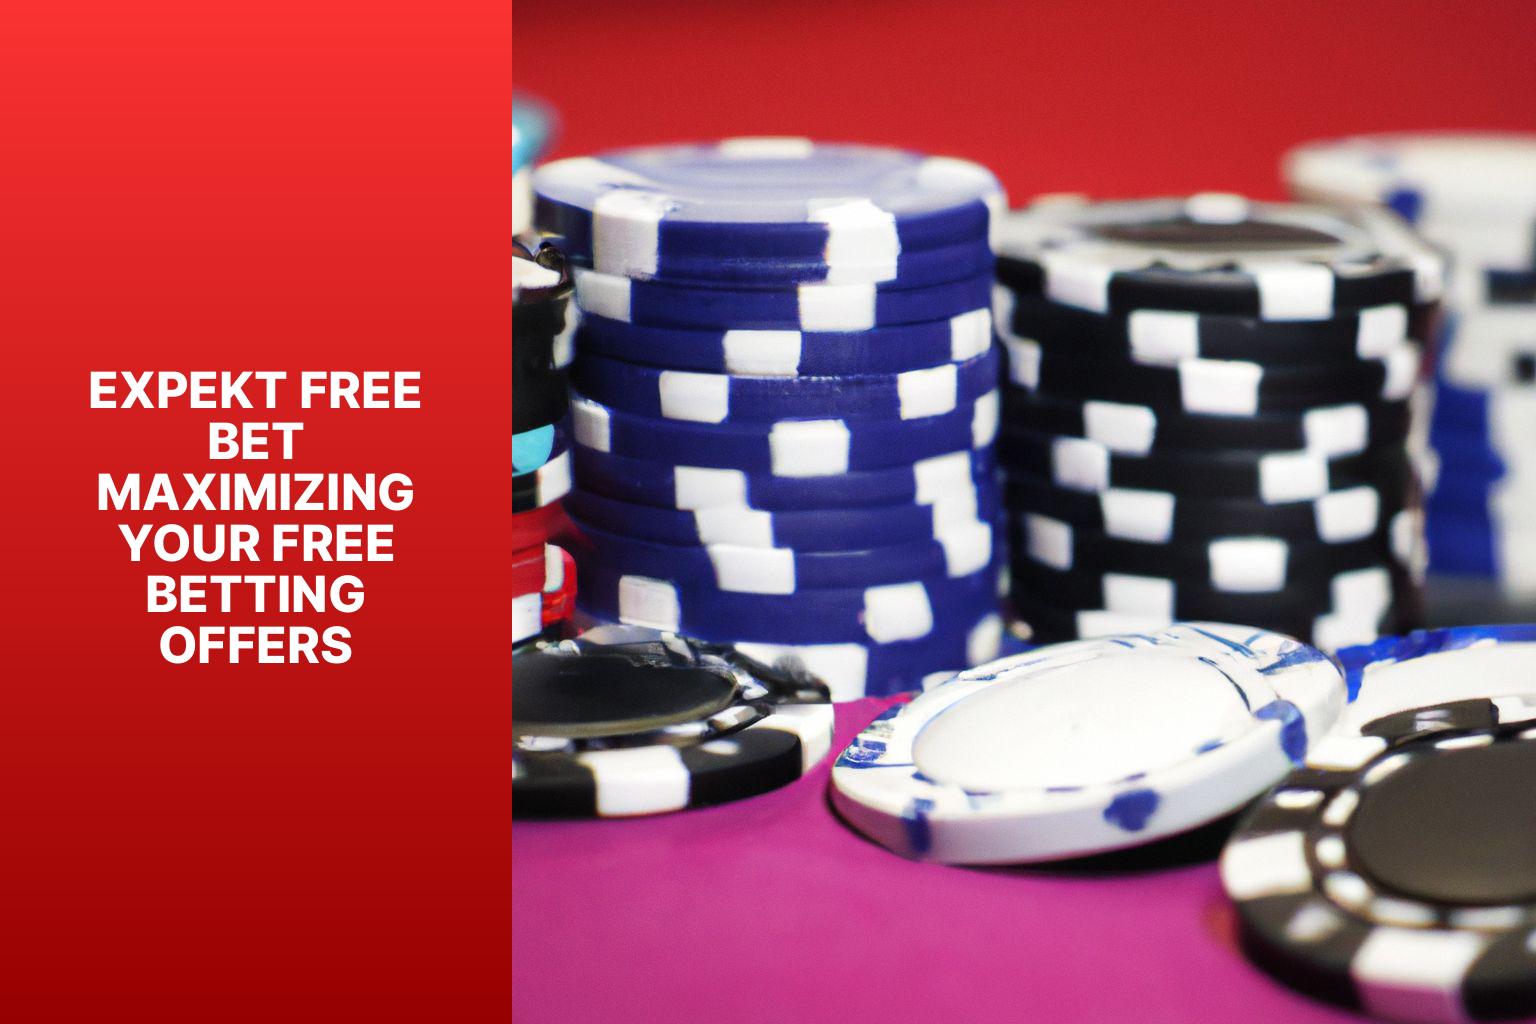 Expekt Free Bet Maximizing Your Free Betting Offers